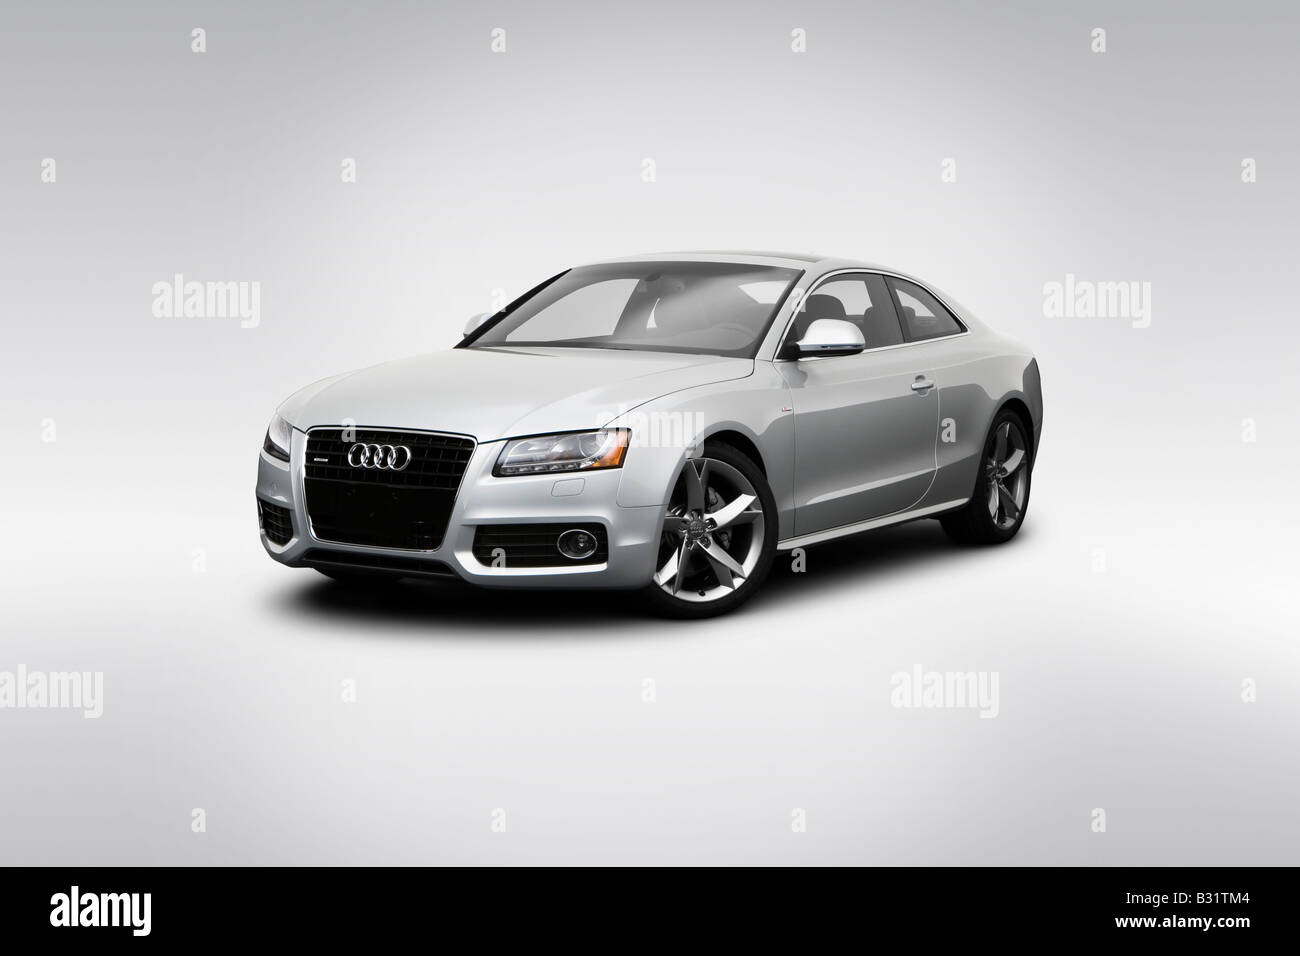 2008 Audi A5 3.2 quattro in Silver - Front angle view Stock Photo